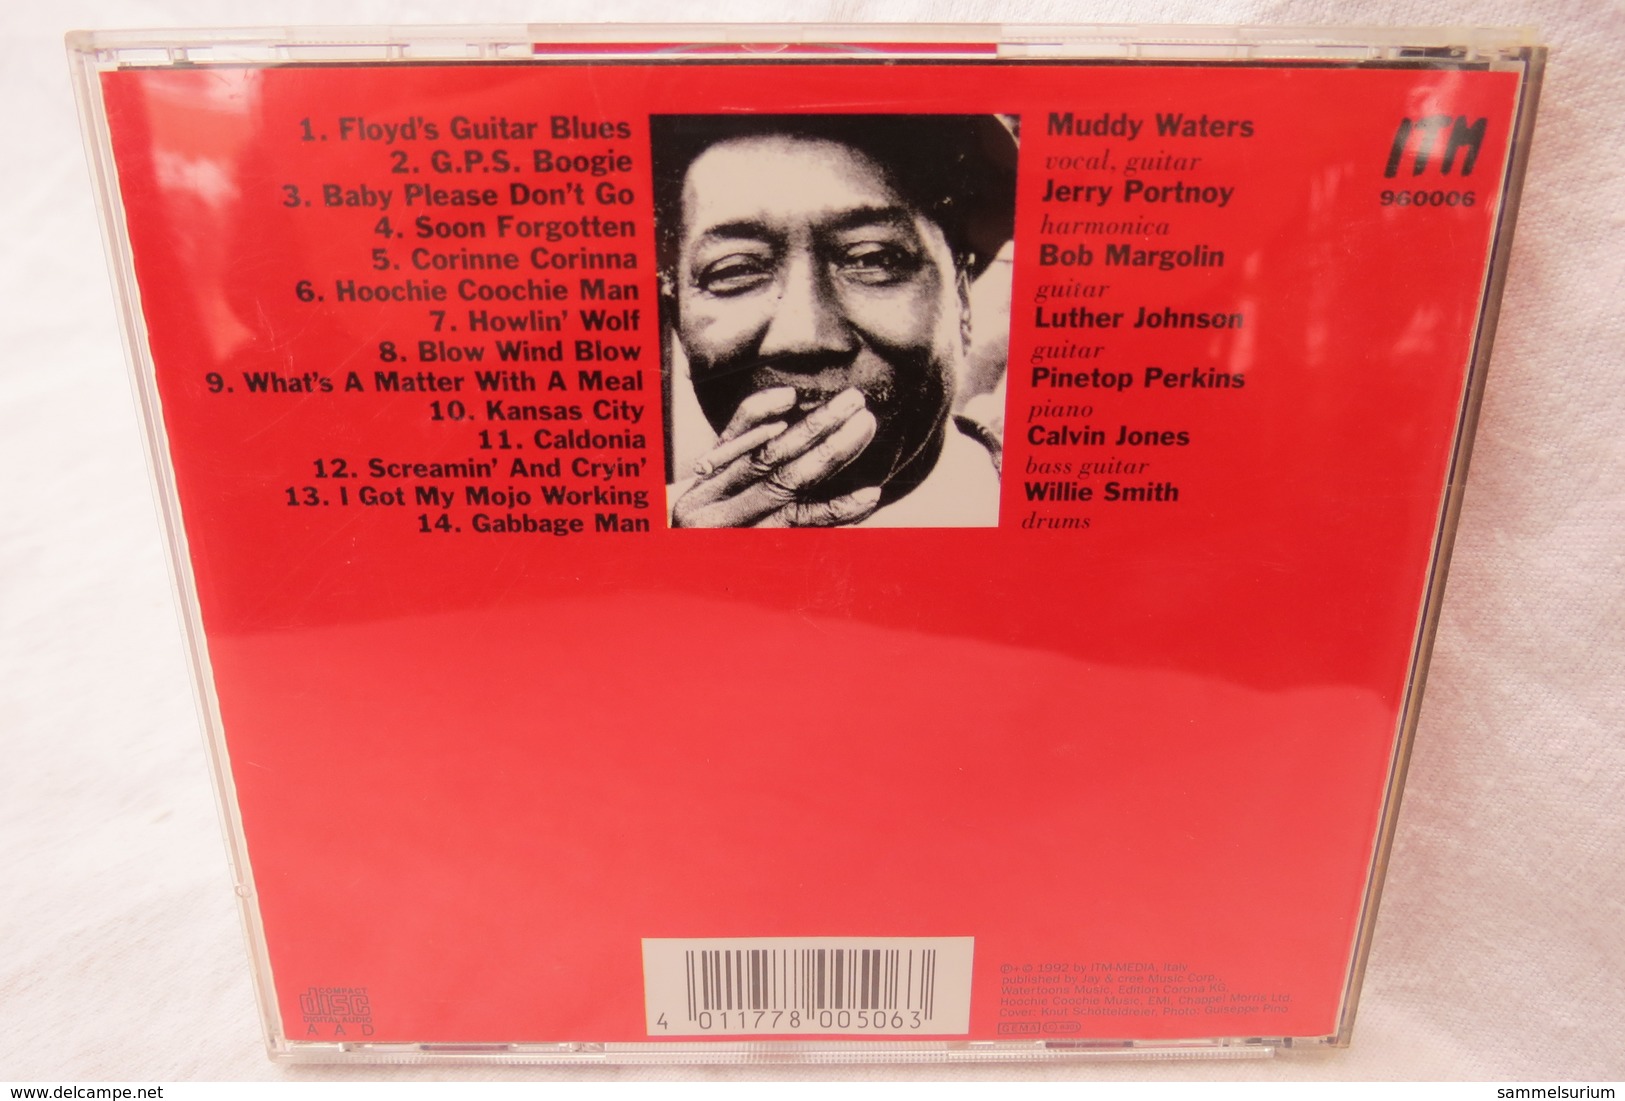 CD "Muddy Waters" Baby Please Don't Go Live At Jazz Jamboree '76 - Soul - R&B